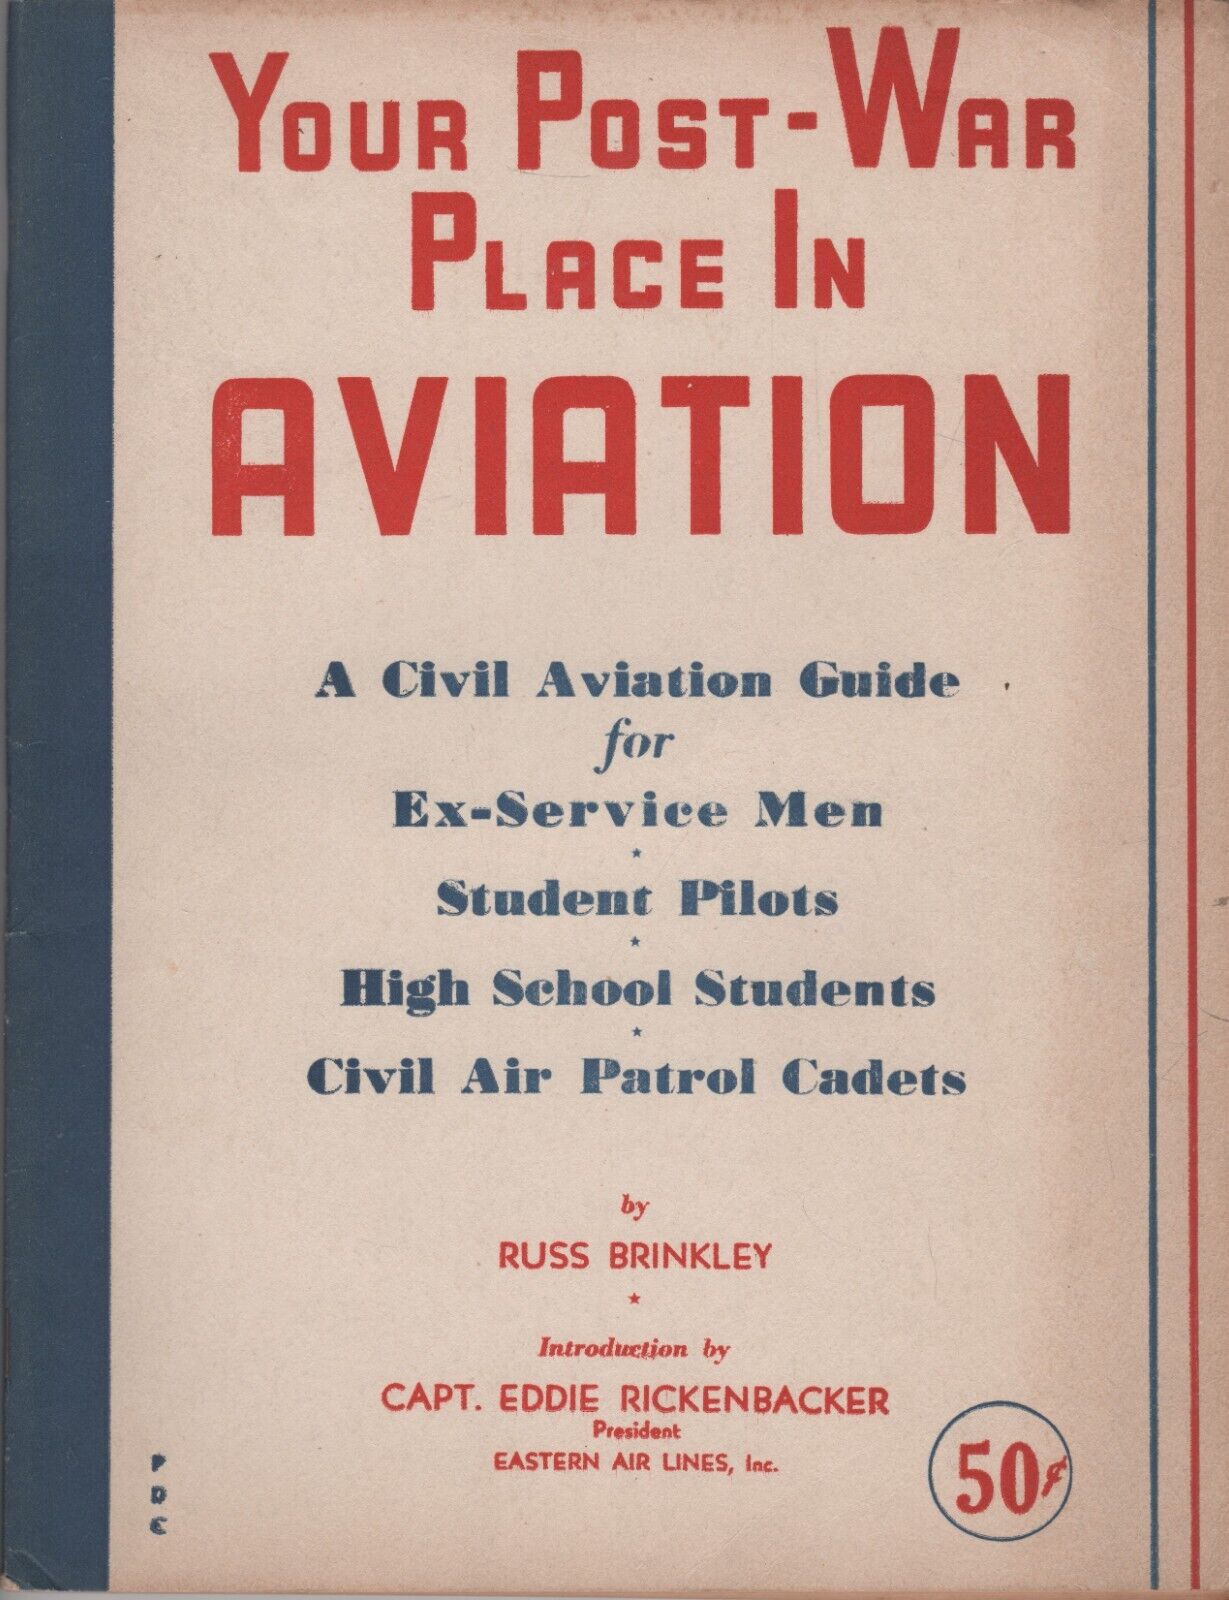 MILITARIA Book (1946) YOUR POST-WAR PLACE IN AVIATION (Brinkley/ Rickenbacker)